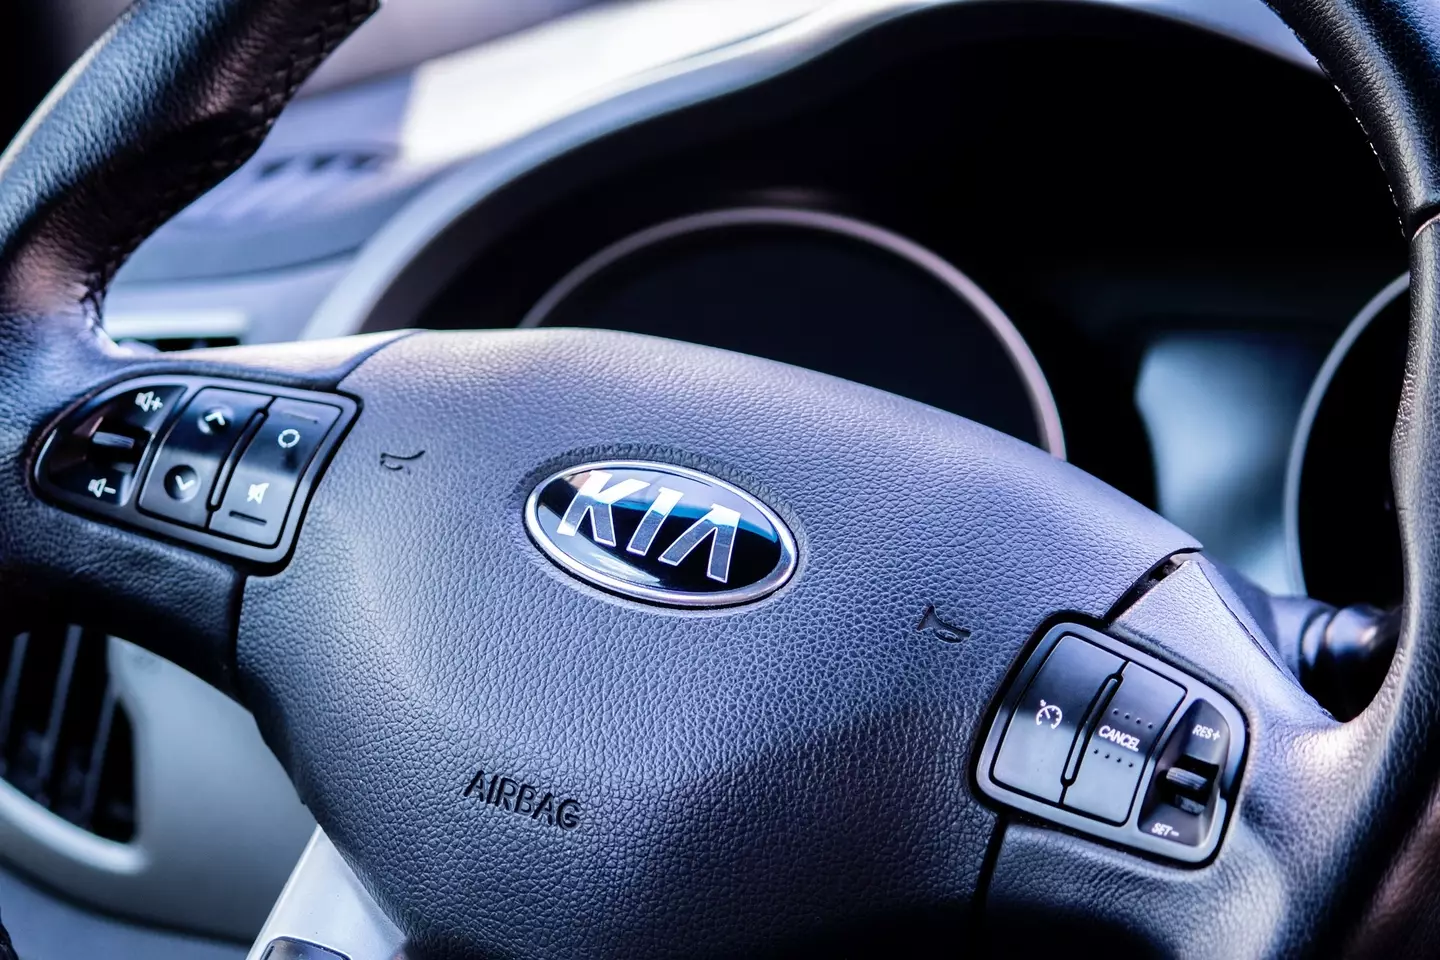 Police have reported a rise in Kia thefts following the challenge.